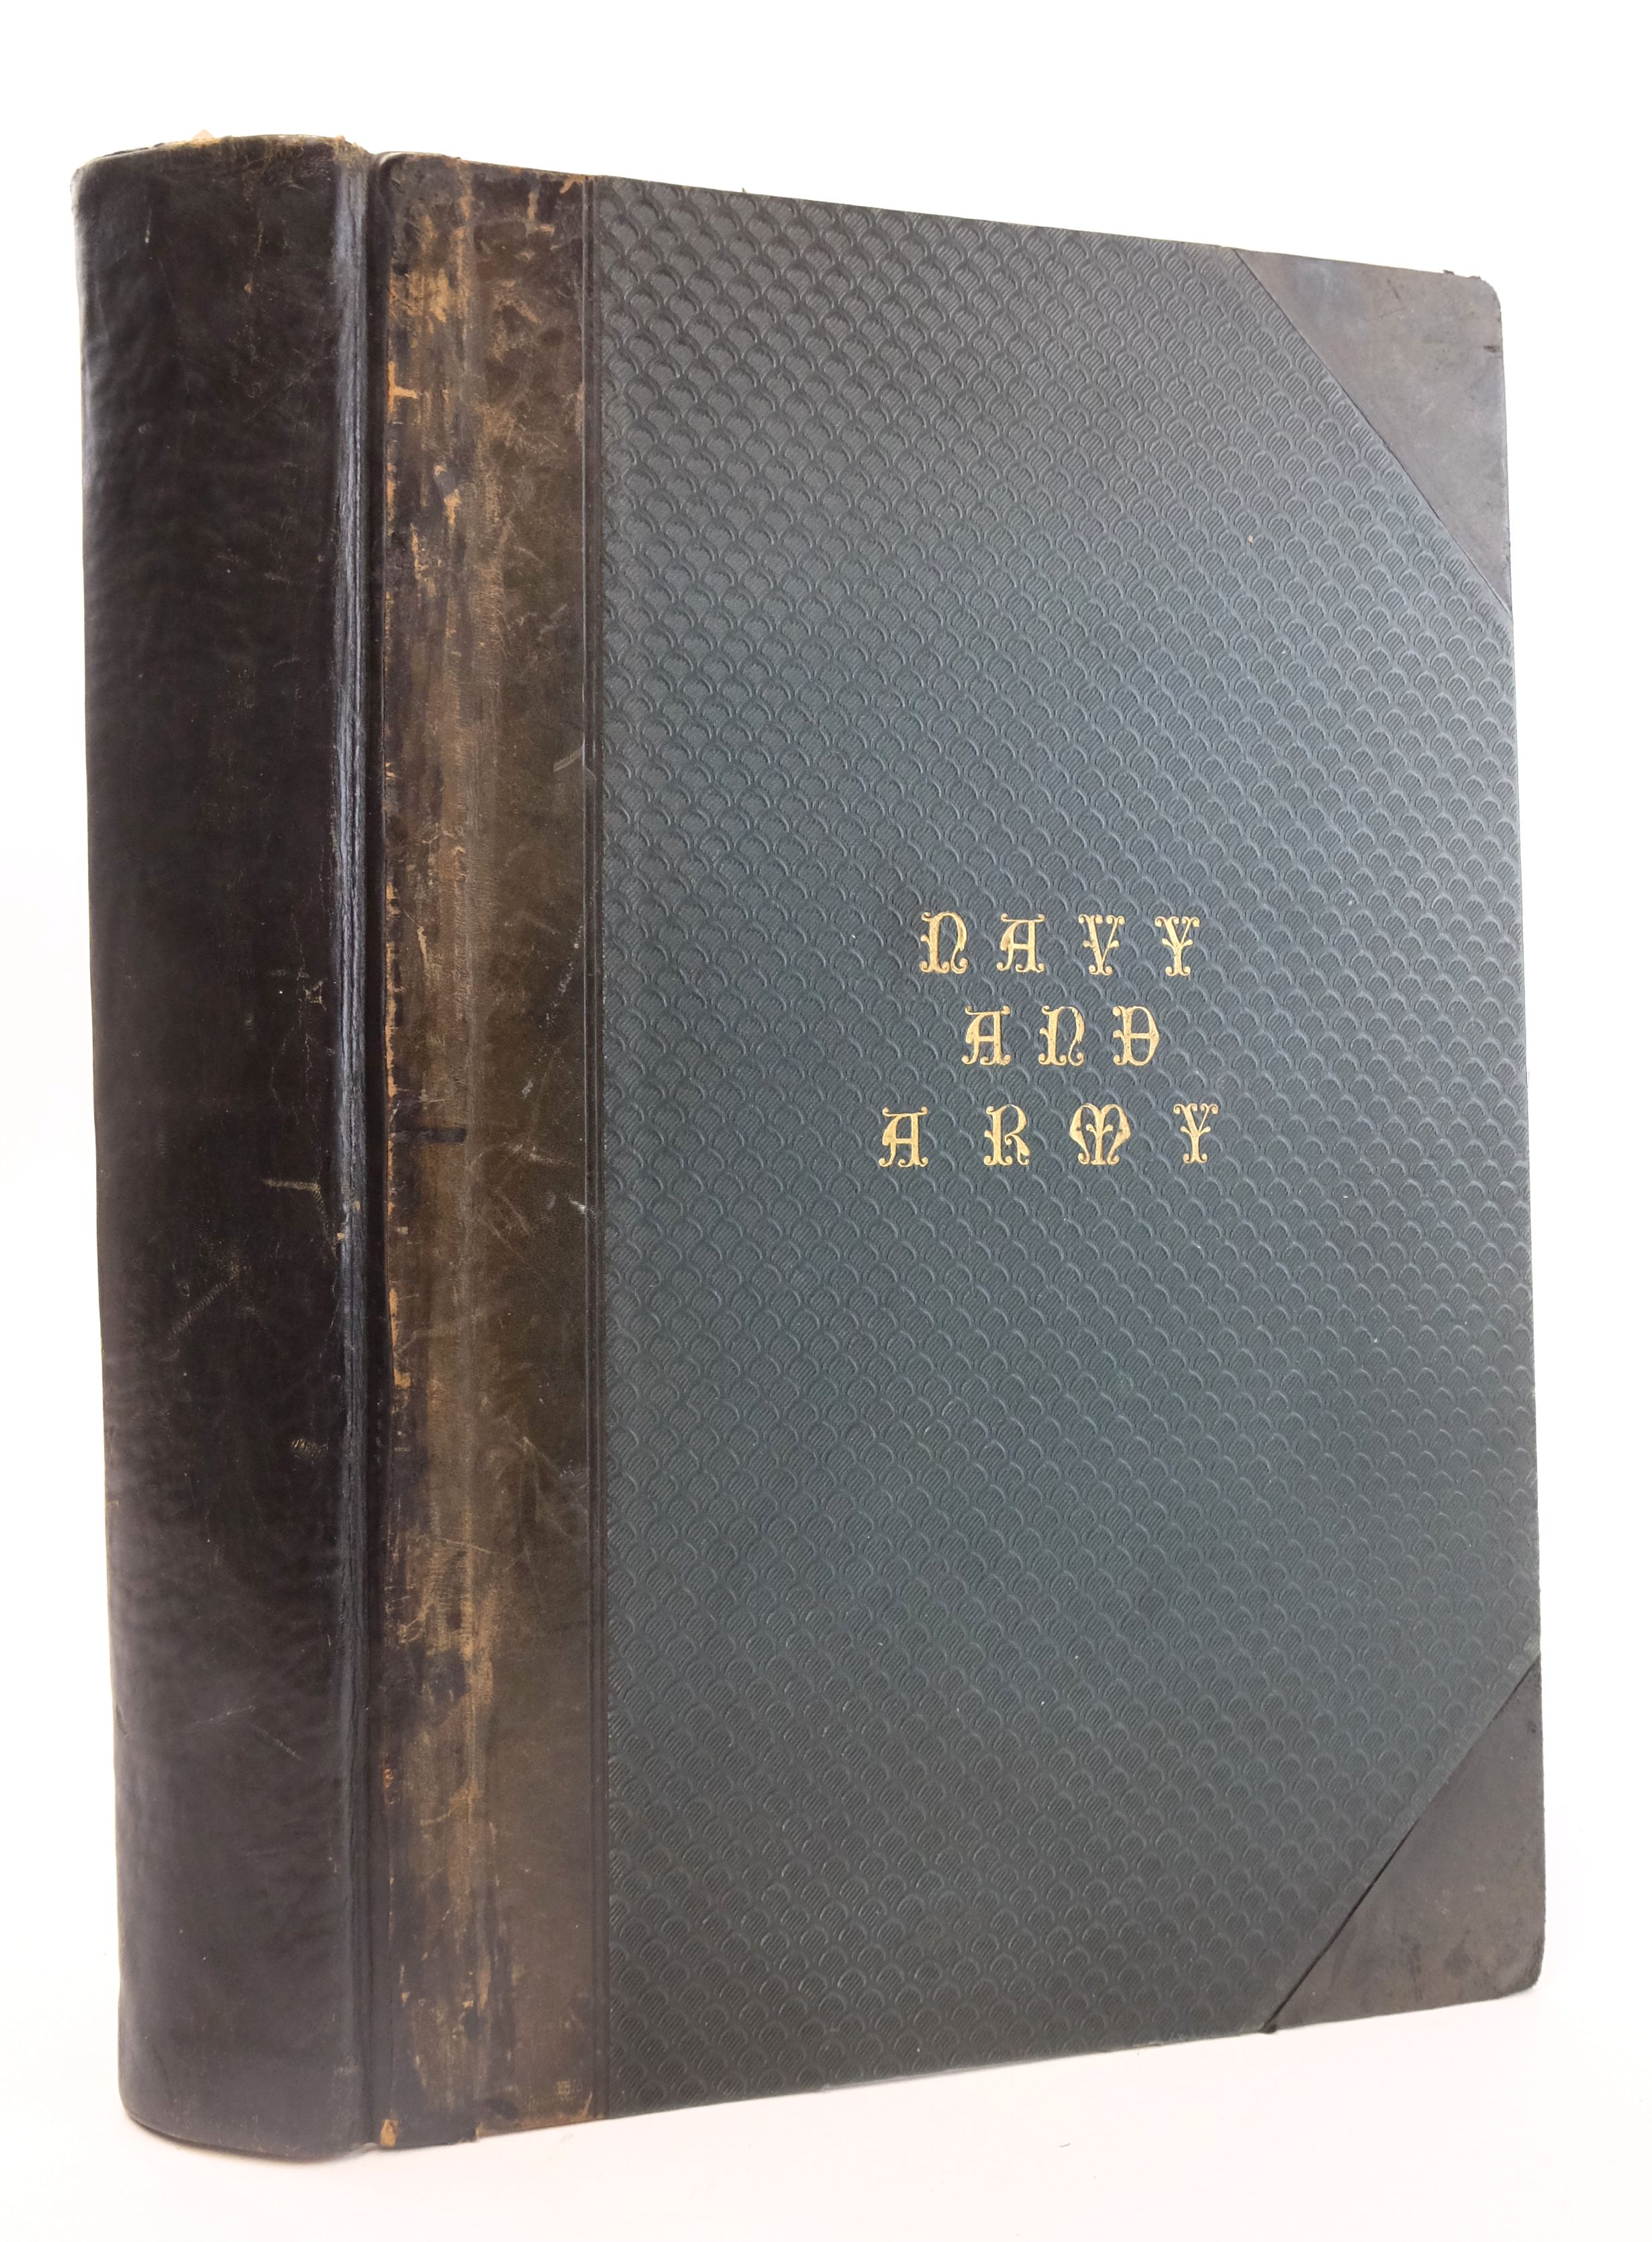 Photo of NAVY &amp; ARMY ILLUSTRATED VOL. I &amp; II written by Robinson, Charles N. published by Hudson &amp; Kearns, George Newnes Limited (STOCK CODE: 1824289)  for sale by Stella & Rose's Books